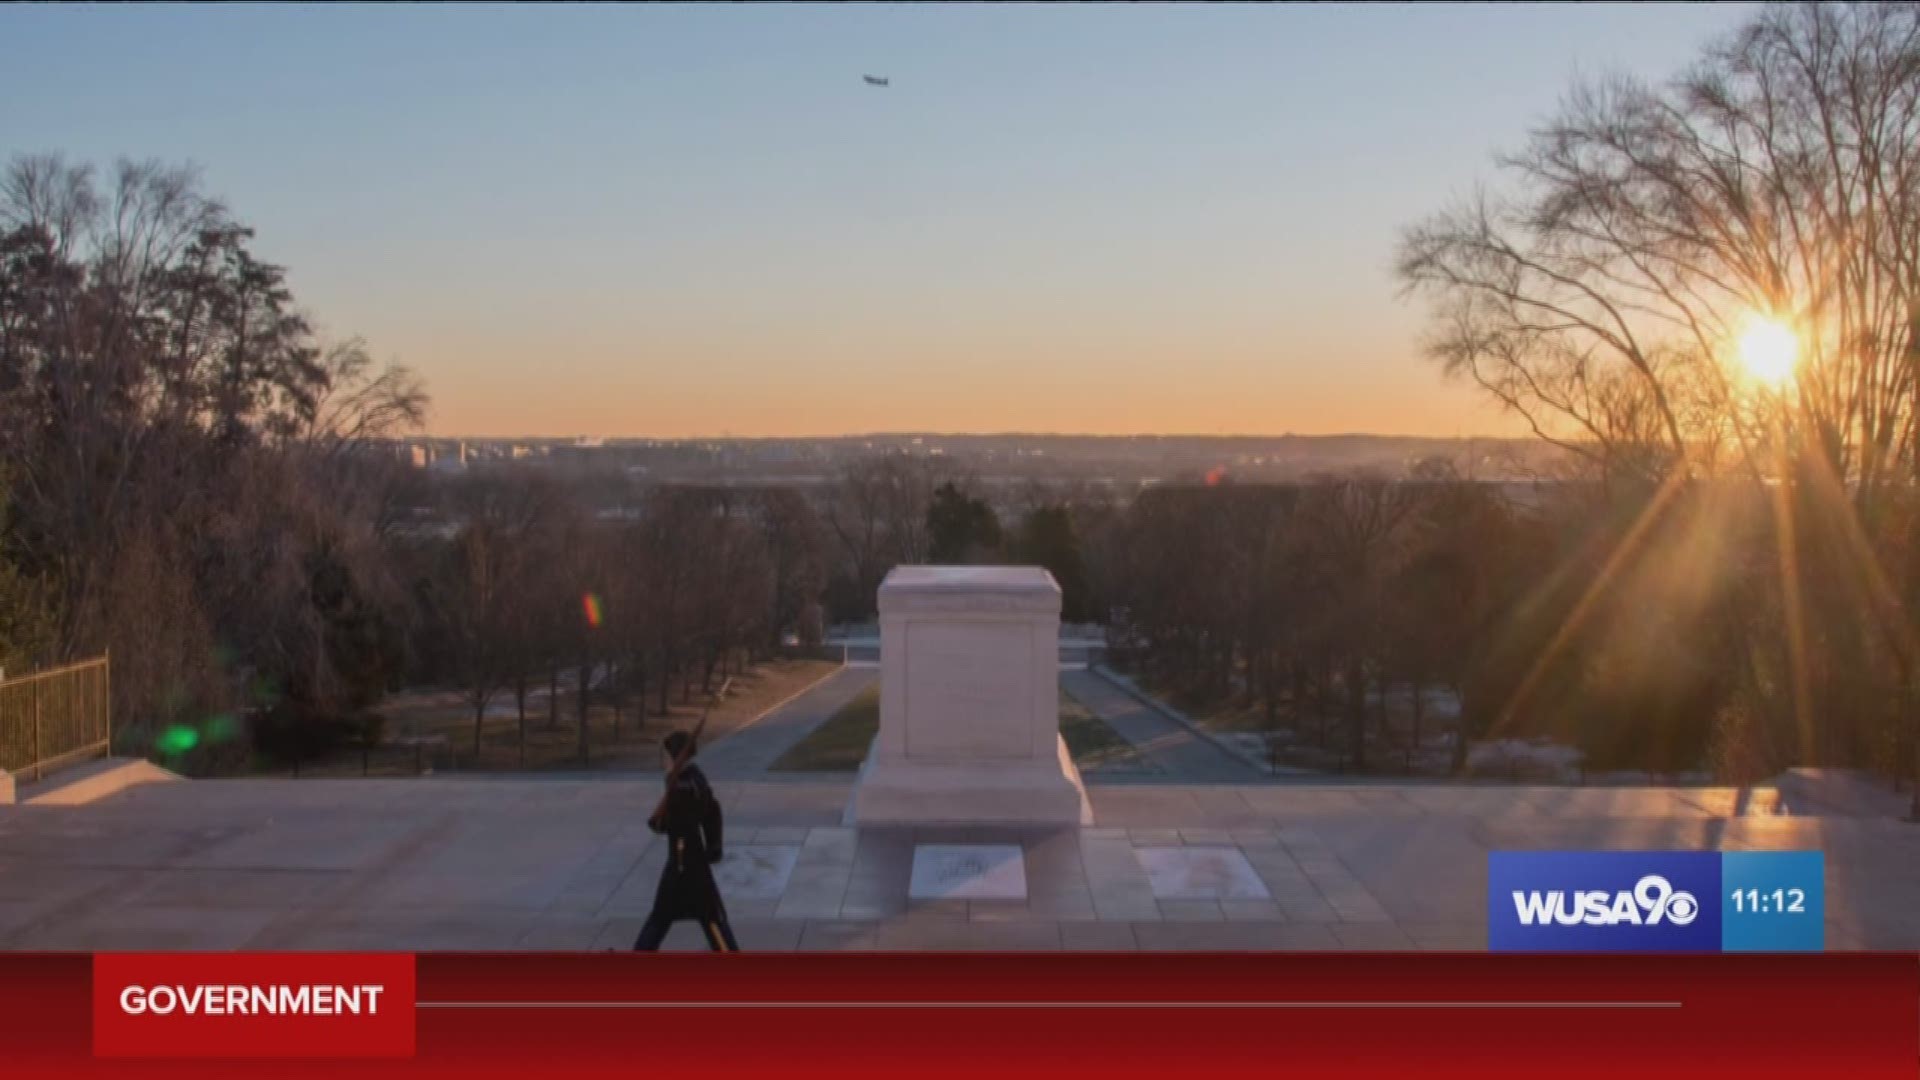 Even as negative windchills gripped the Washington area, sentinels from the nation’s Old Guard watched over the tomb 24 hours a day, each standing guard for one hour.